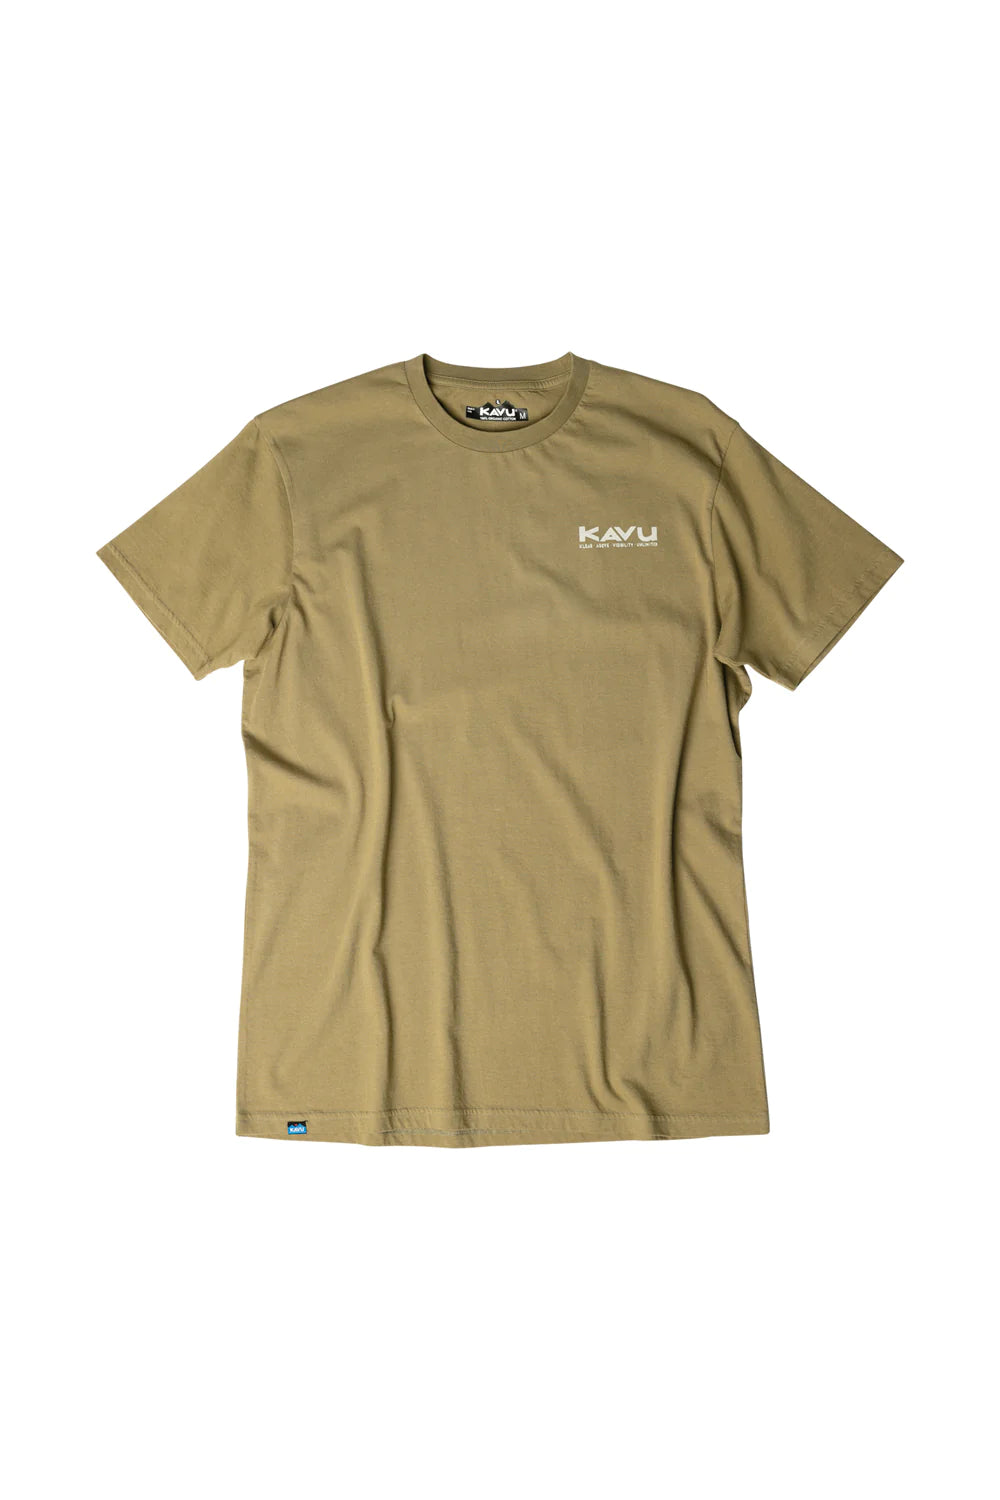 Paddle Out Tee